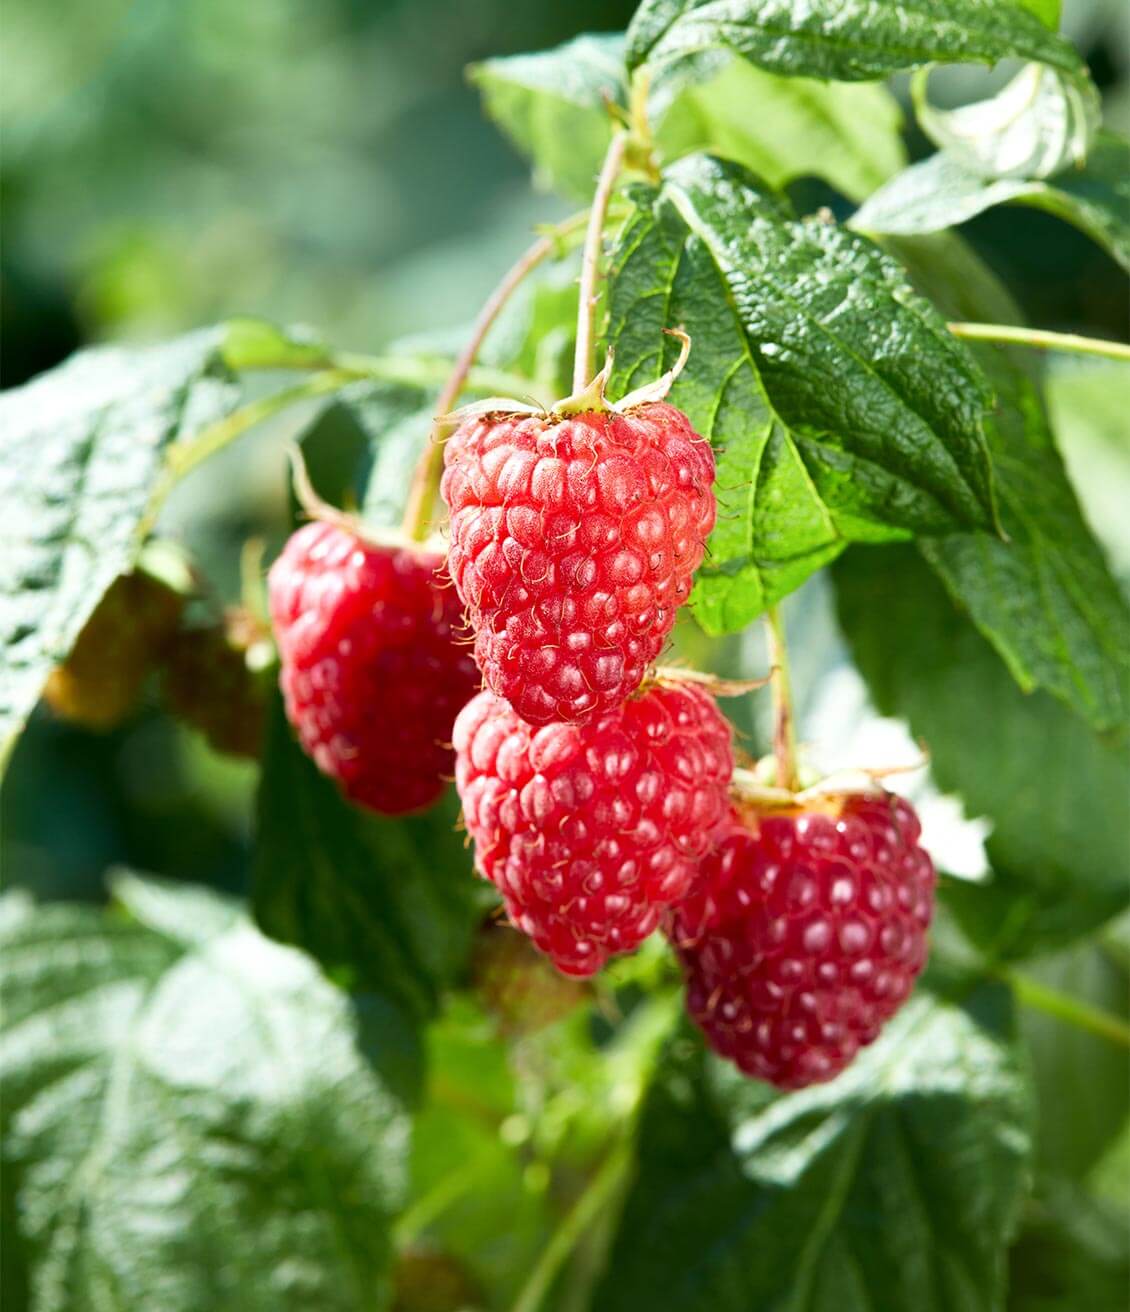 Raspberry fruits, once dried, are used in our fruity blends